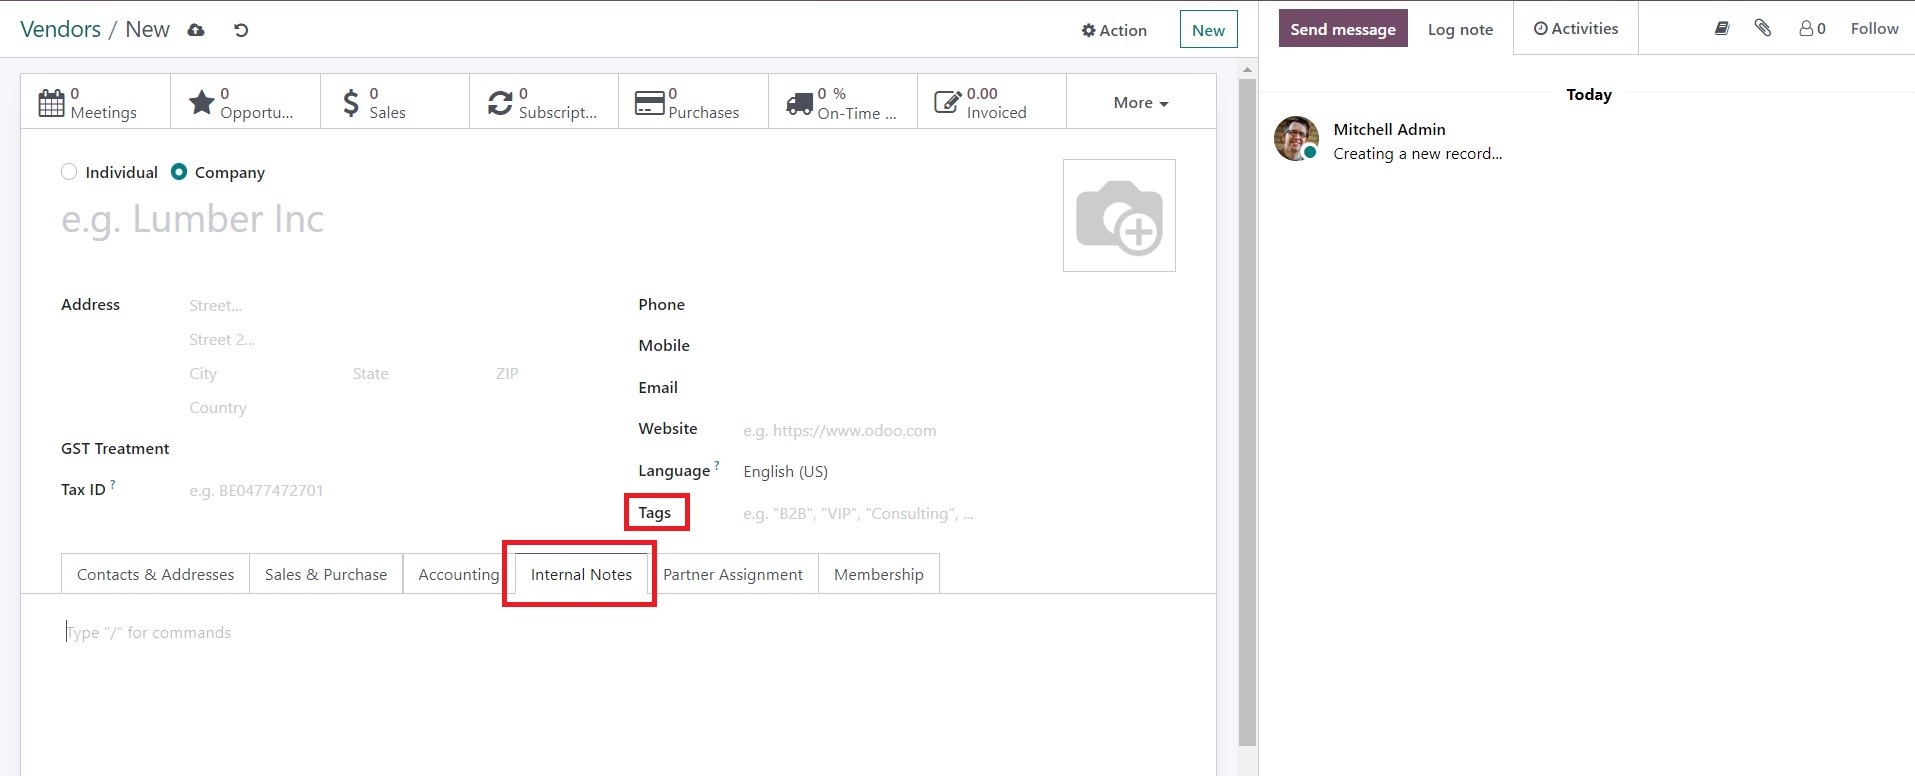 Setting Up Vendor Records and Pricelists in Odoo - Midis - 4